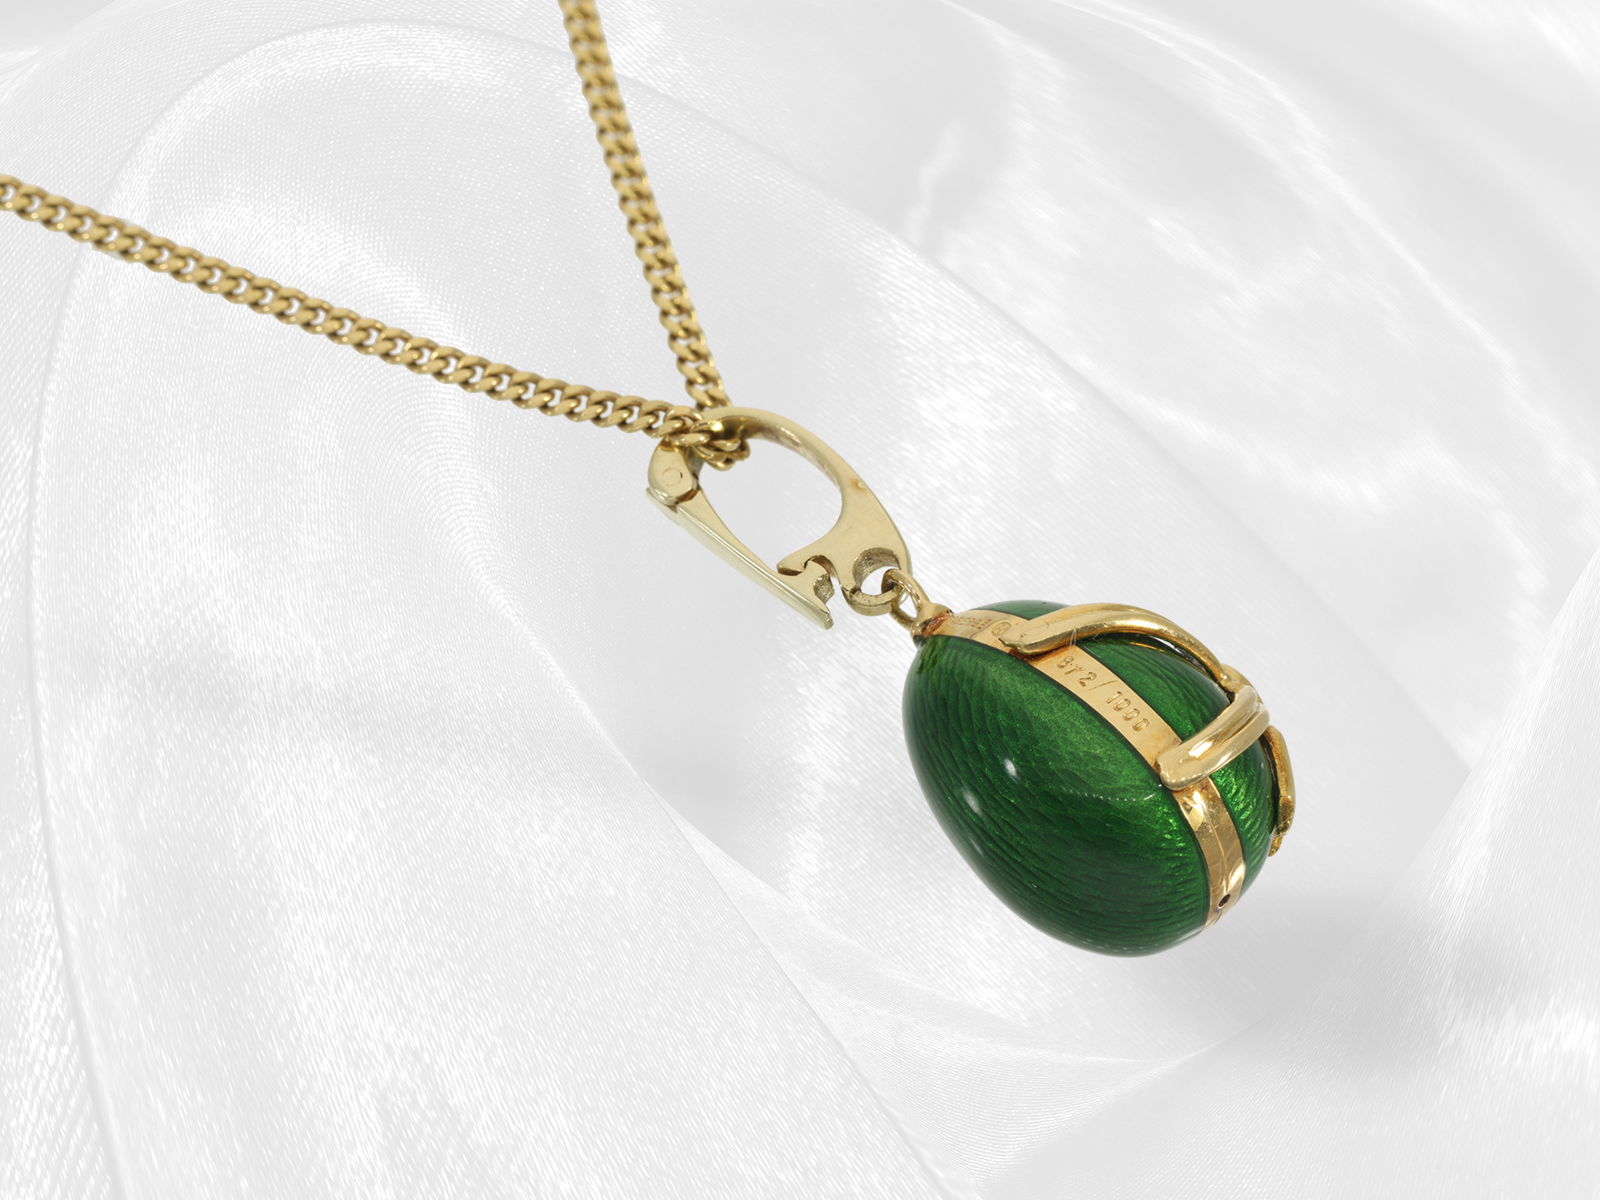 High-quality Fabergé enamel pendant with brilliant-cut diamonds, 18K gold, limited edition, with nec - Image 4 of 12